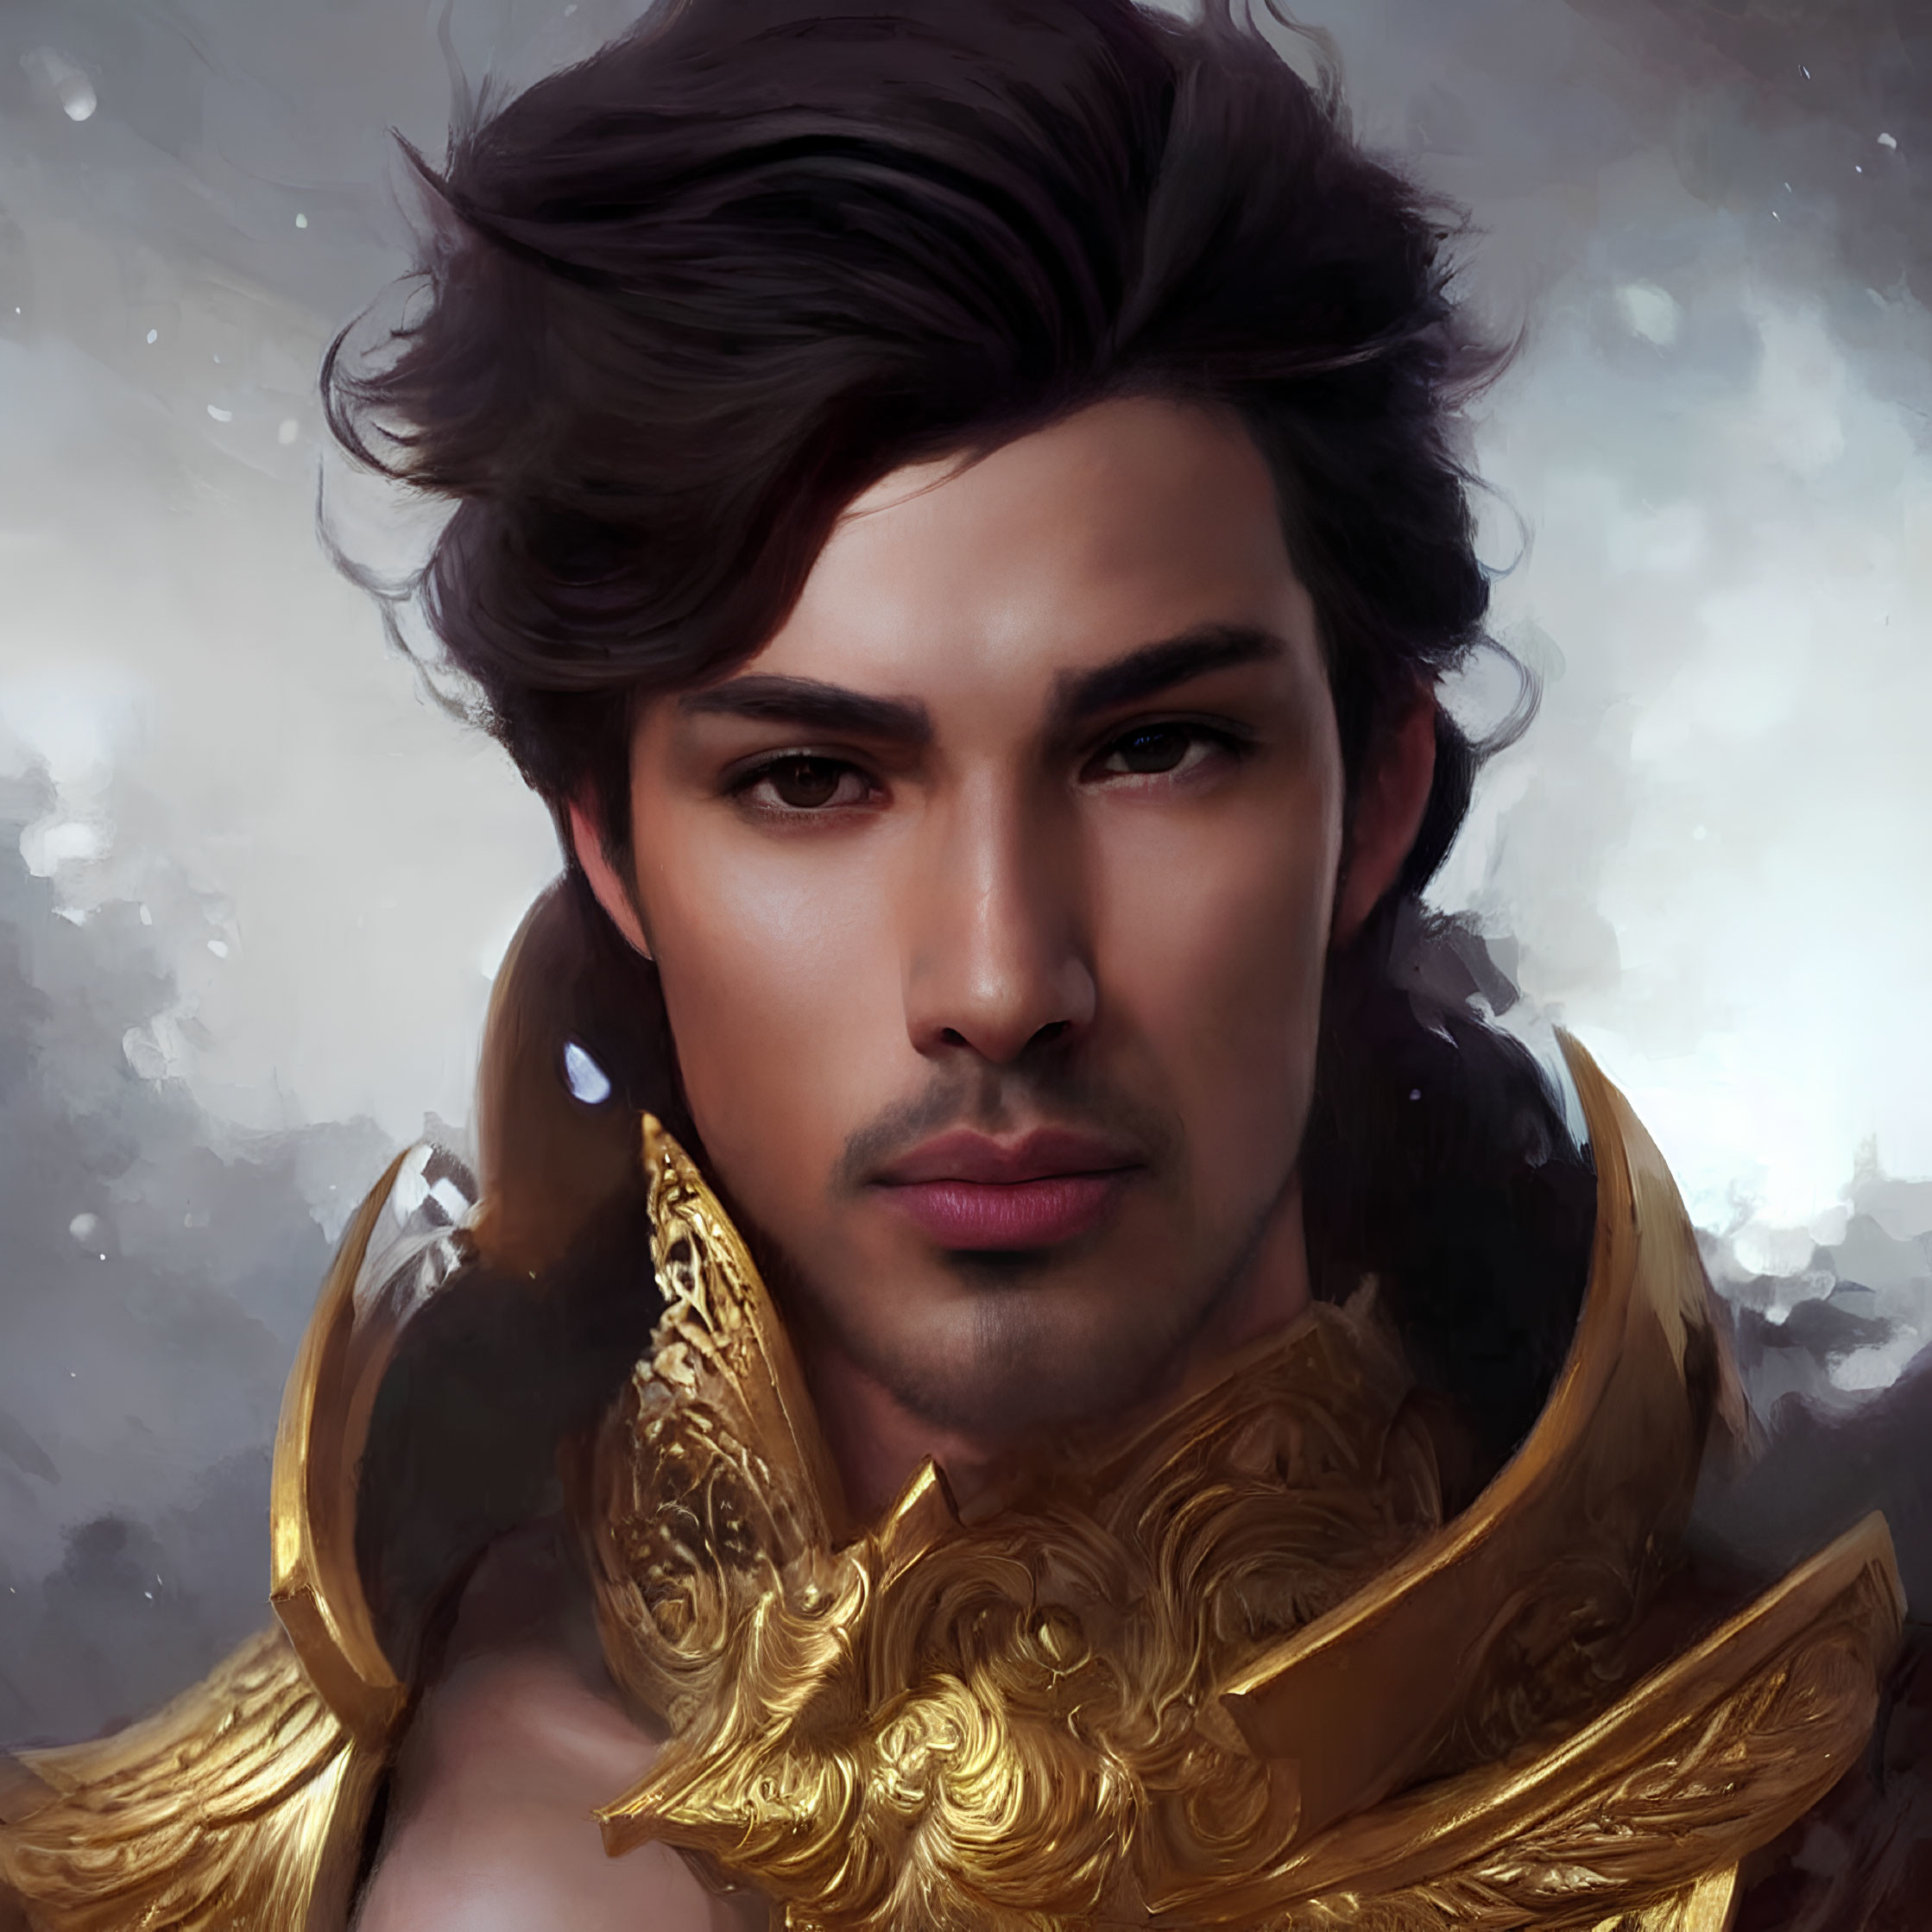 Detailed illustration of man in golden armor with sharp features against misty backdrop